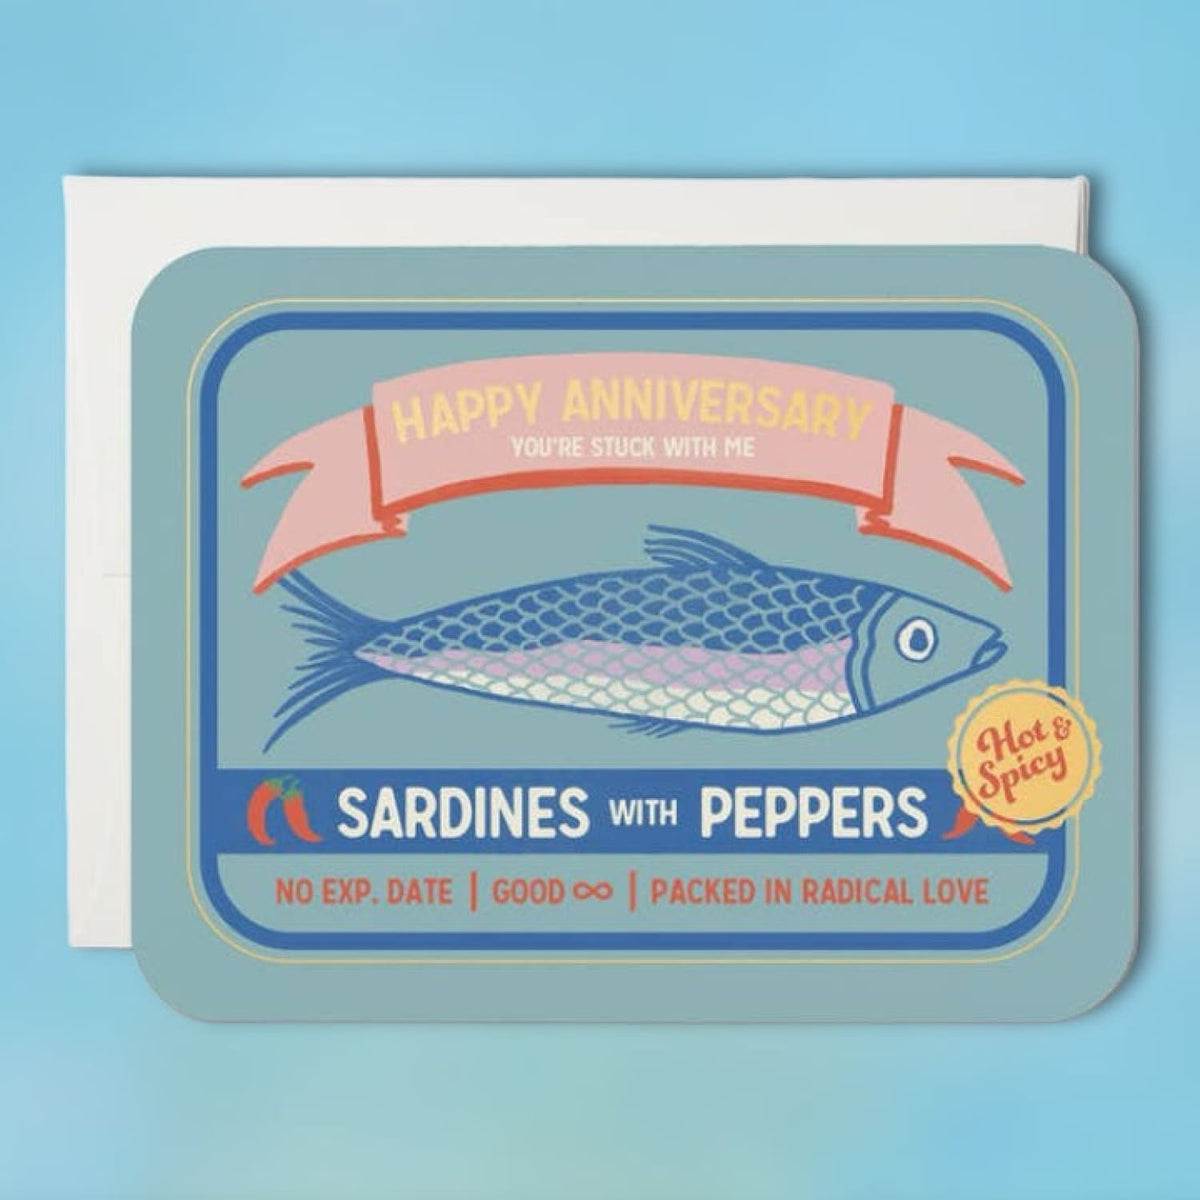 You’re Stuck With Me Sardines Anniversary Greeting Card